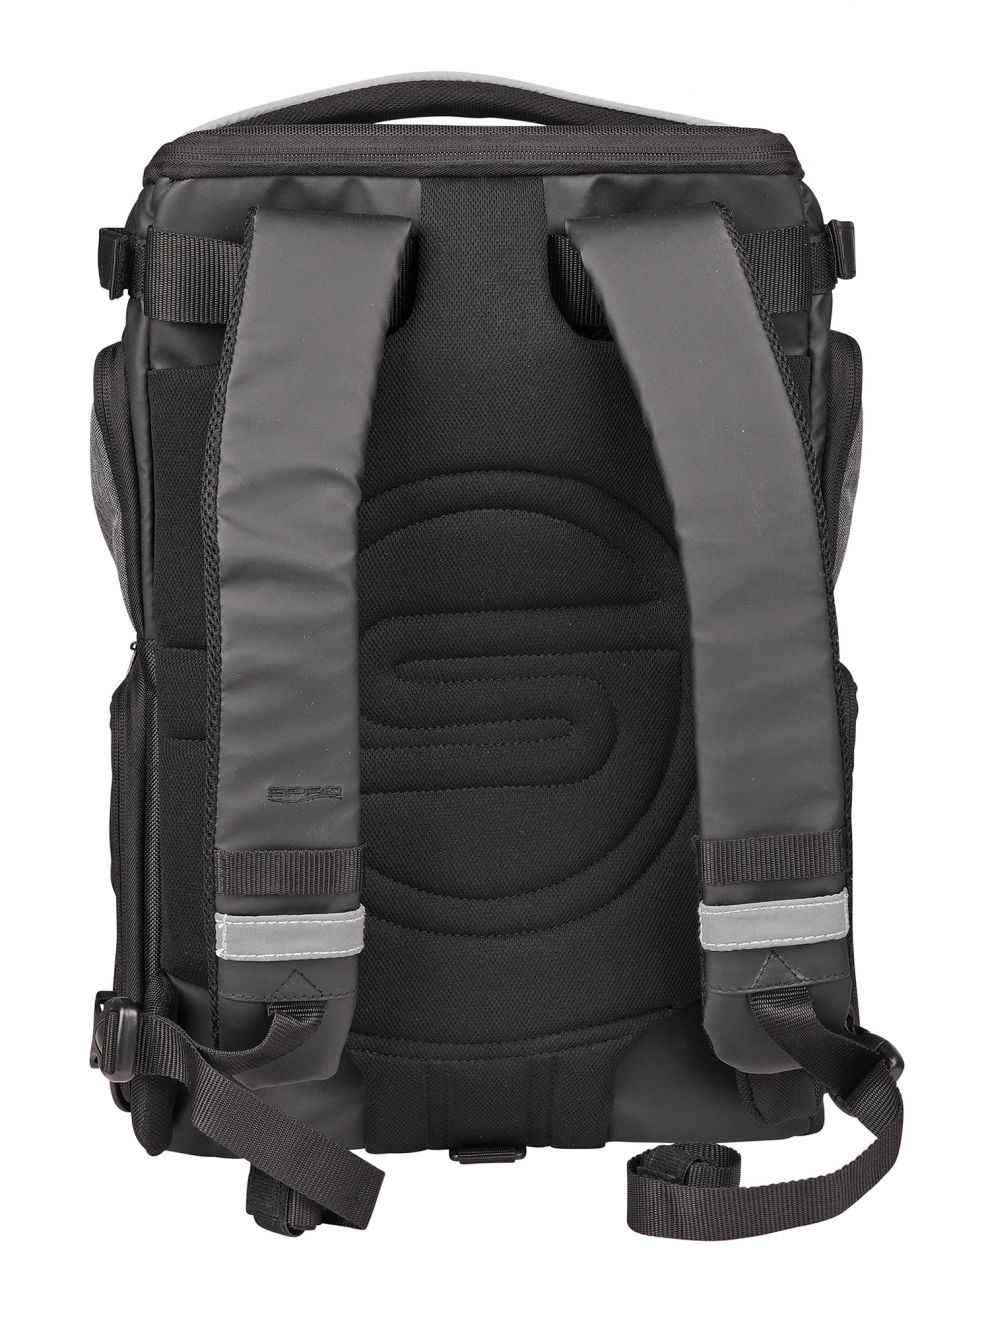 Spro Freestyle Backpack 35 (45x35x17cm)